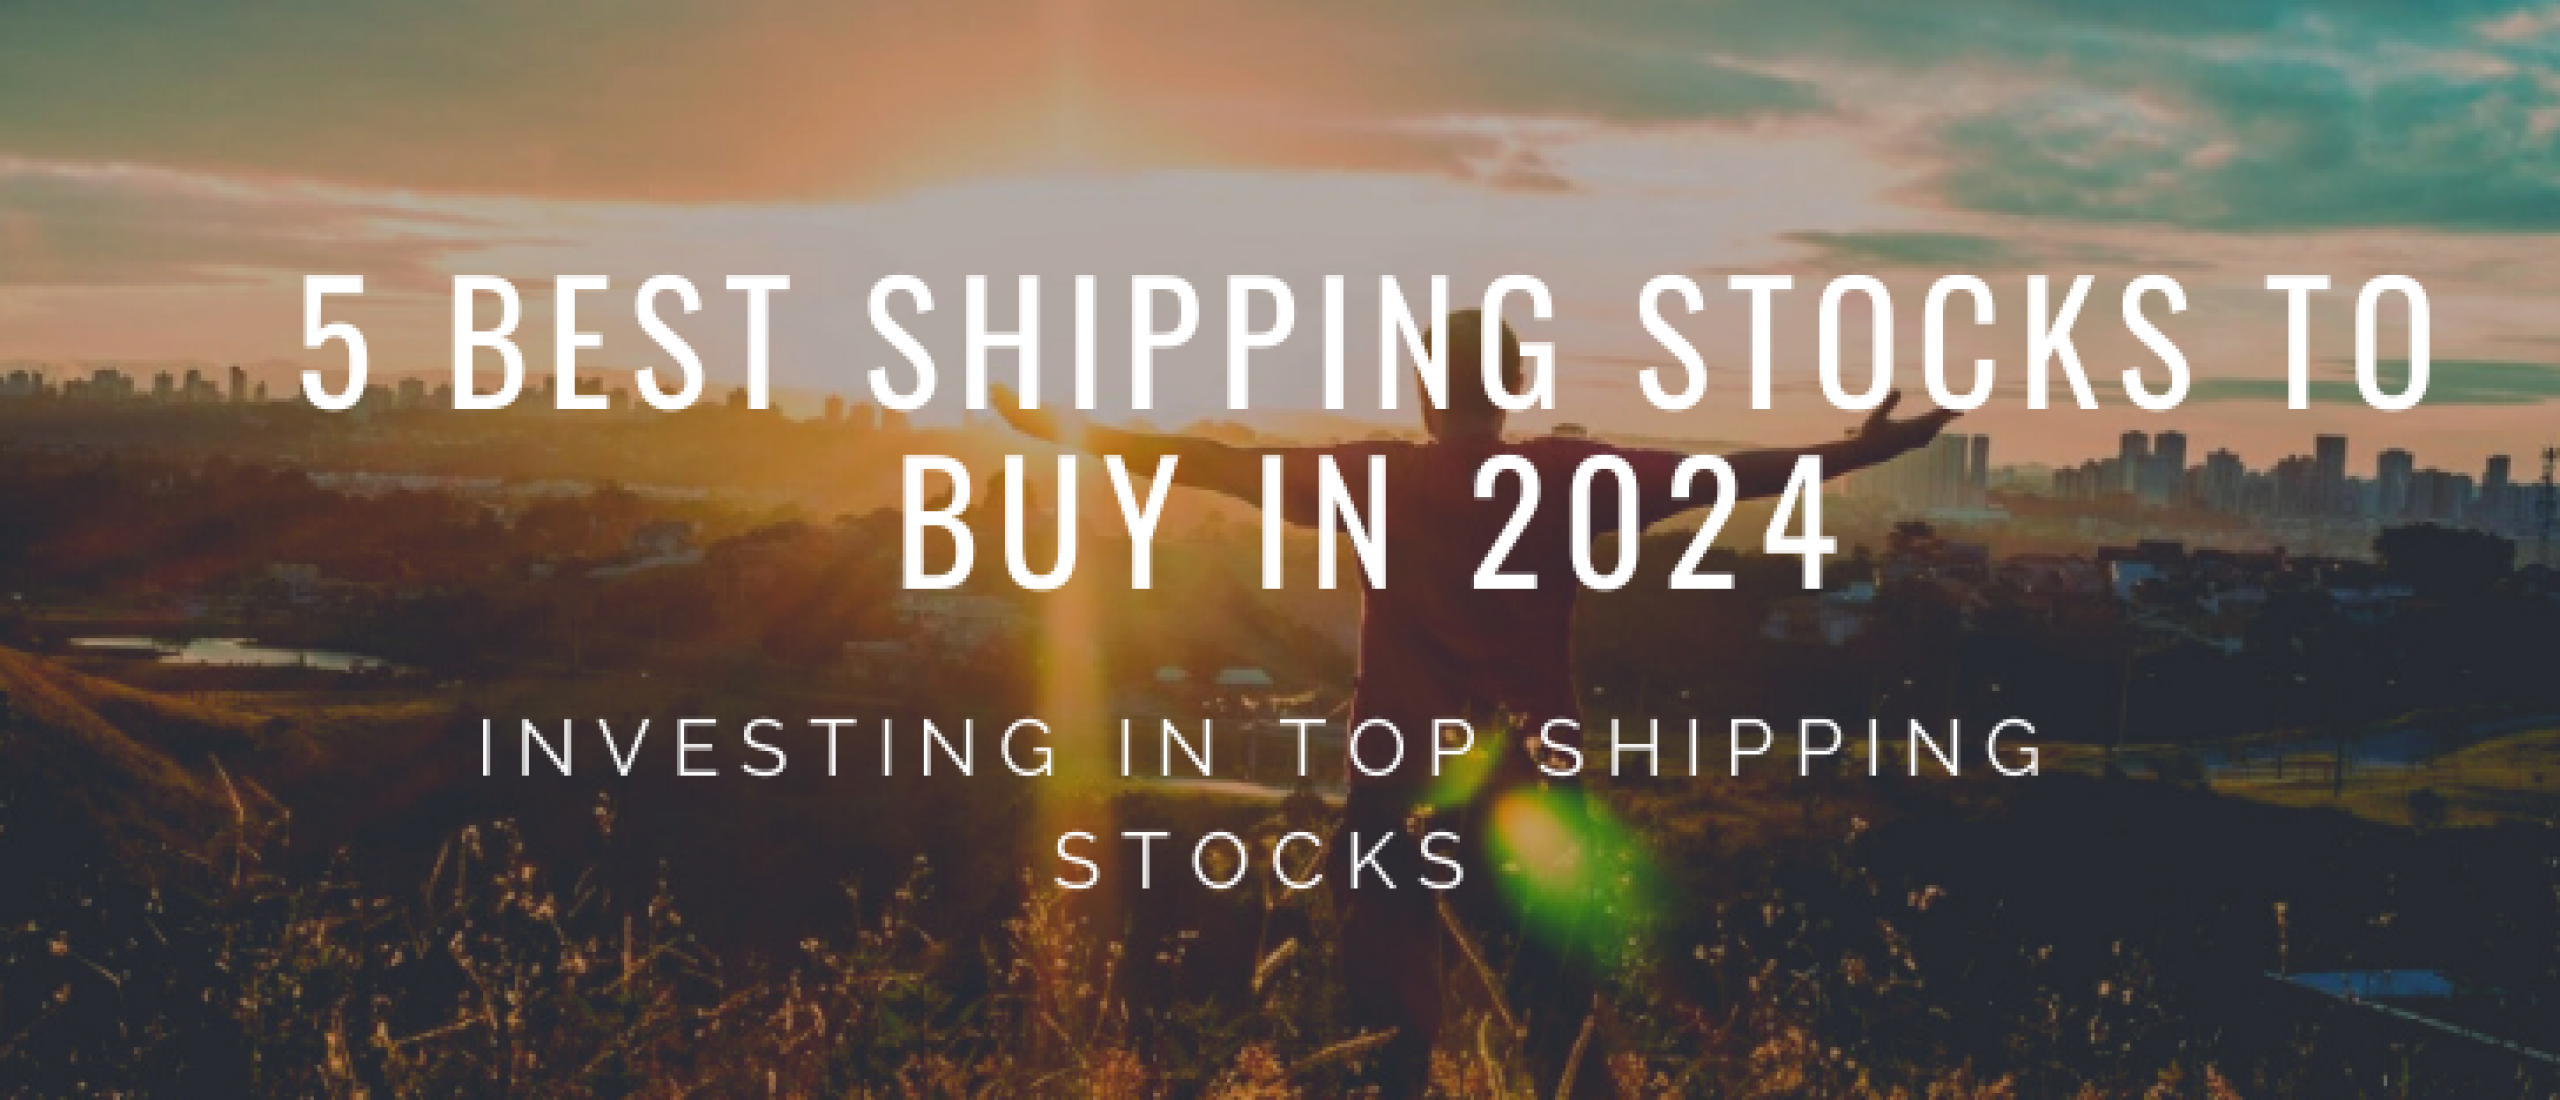 5 Best Shipping Stocks to Buy in 2024: Investing in TOP Shipping Stocks